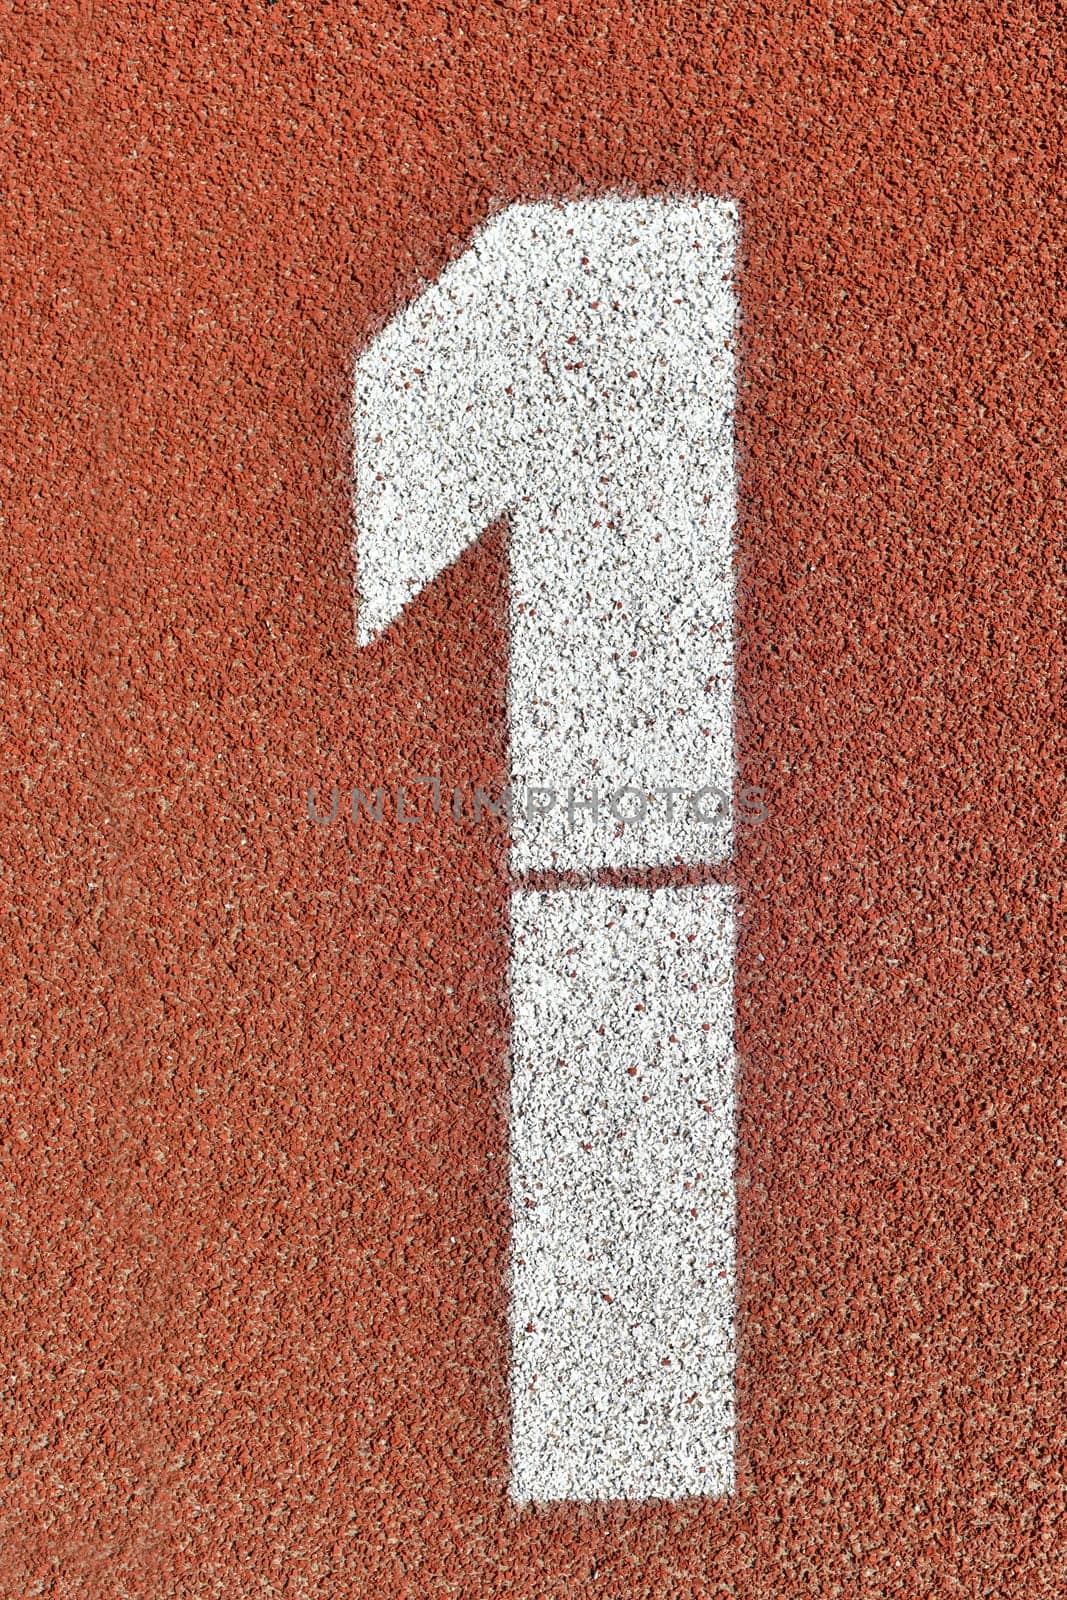 Number one on the red runway is numbered in a stadium